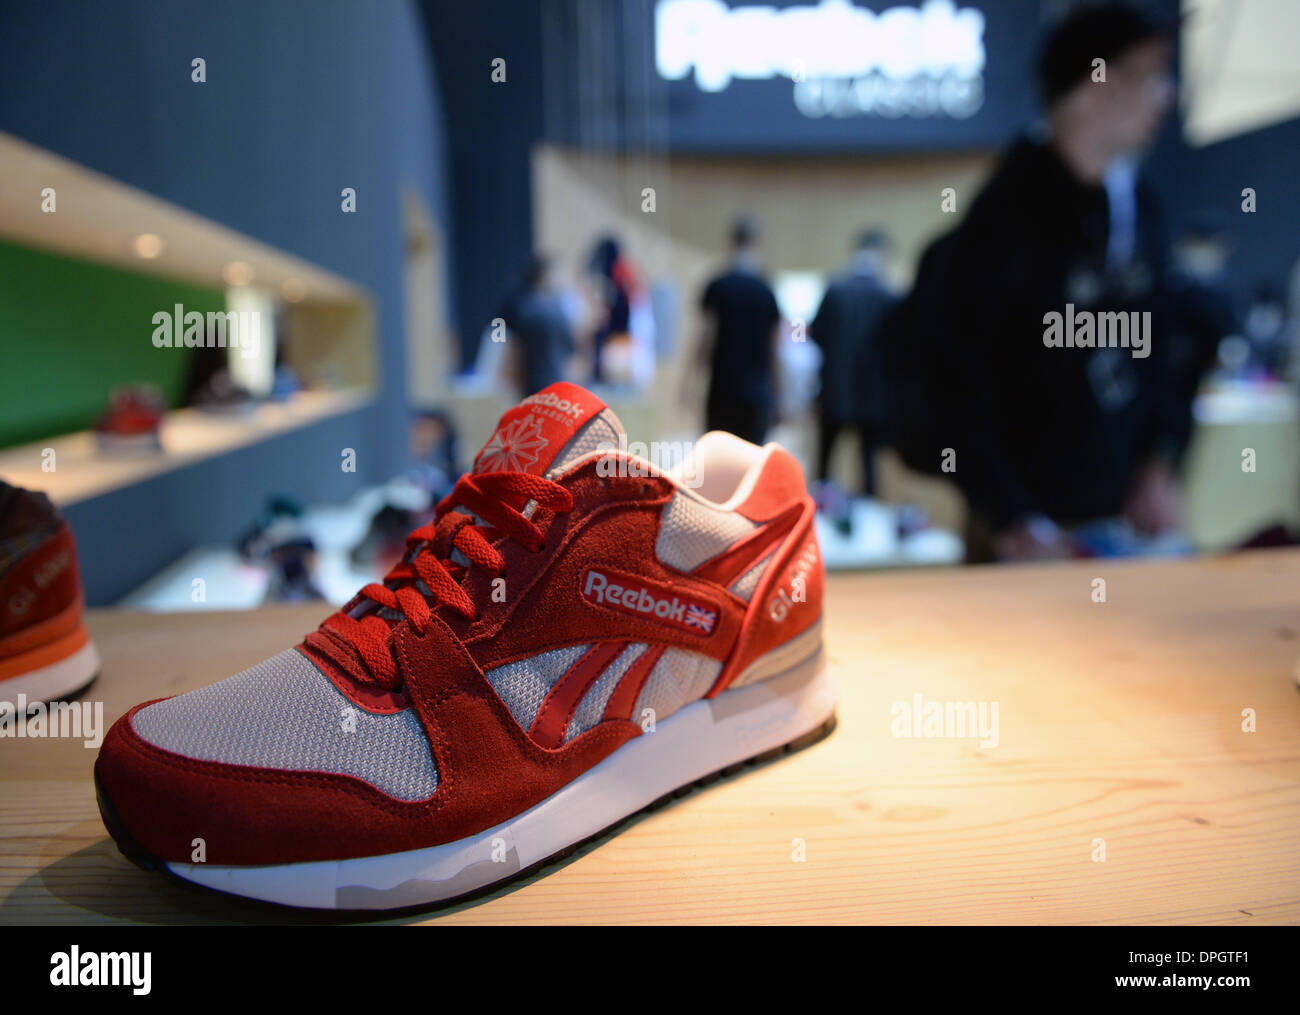 Berlin, Germany. 14th Jan, 2014. A sports shoe of US label Reebok is pictured fashion fair & Butter' in the Tempelhof airport in Berlin, Germany, 14 January 2014.